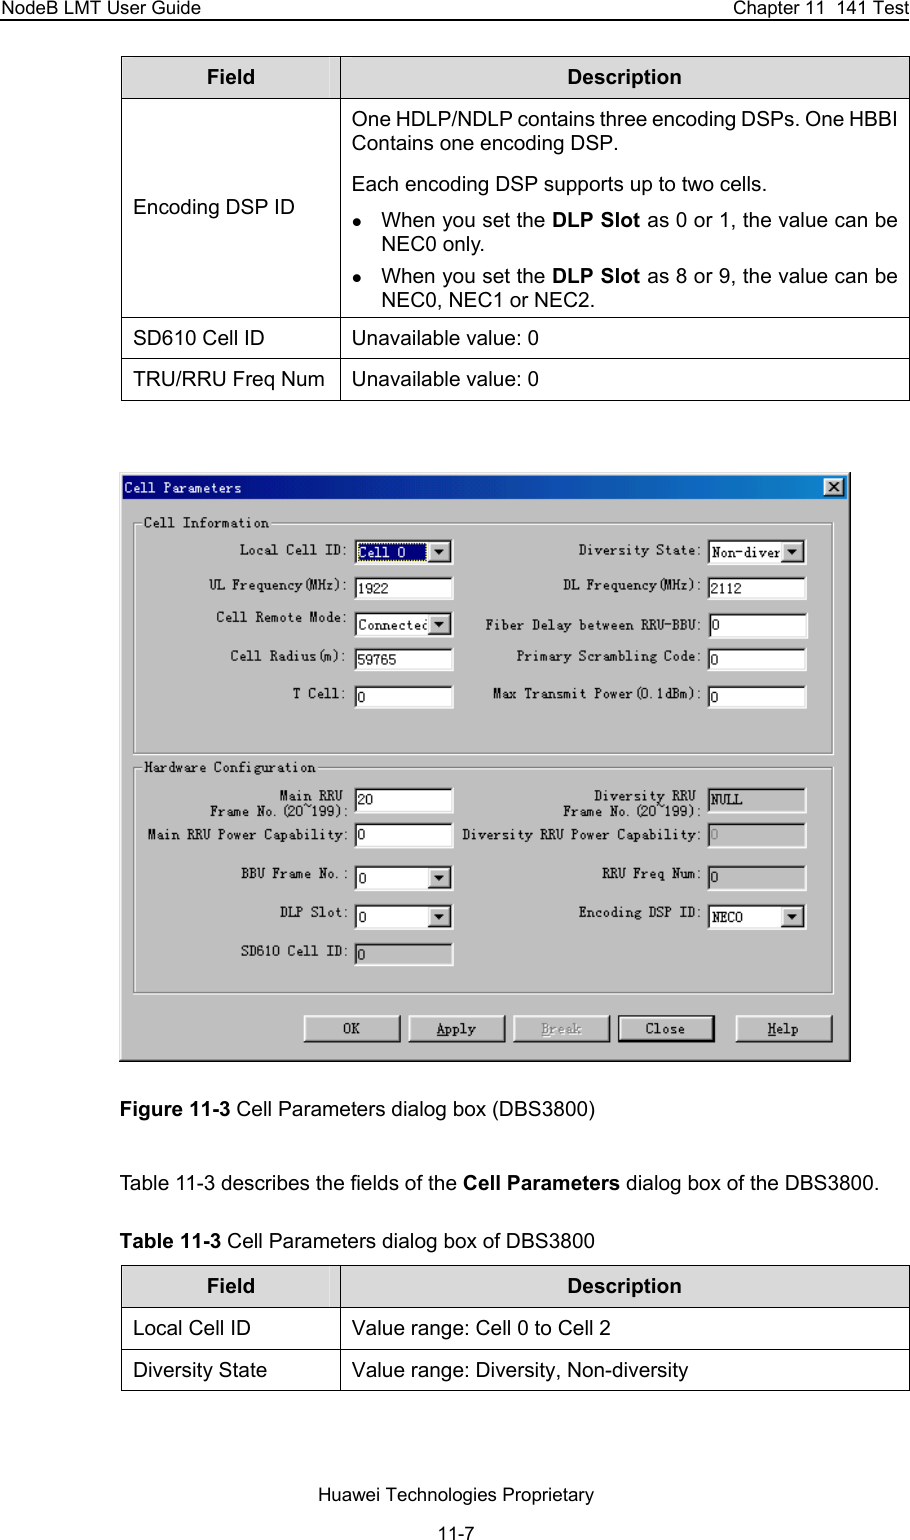 NodeB LMT User Guide  Chapter 11  141 Test Field  Description  Encoding DSP ID  One HDLP/NDLP contains three encoding DSPs. One HBBI Contains one encoding DSP. Each encoding DSP supports up to two cells.  z When you set the DLP Slot as 0 or 1, the value can be NEC0 only.  z When you set the DLP Slot as 8 or 9, the value can be NEC0, NEC1 or NEC2.  SD610 Cell ID   Unavailable value: 0 TRU/RRU Freq Num  Unavailable value: 0   Figure 11-3 Cell Parameters dialog box (DBS3800) Table 11-3 describes the fields of the Cell Parameters dialog box of the DBS3800.  Table 11-3 Cell Parameters dialog box of DBS3800 Field  Description  Local Cell ID  Value range: Cell 0 to Cell 2 Diversity State  Value range: Diversity, Non-diversity  Huawei Technologies Proprietary 11-7 